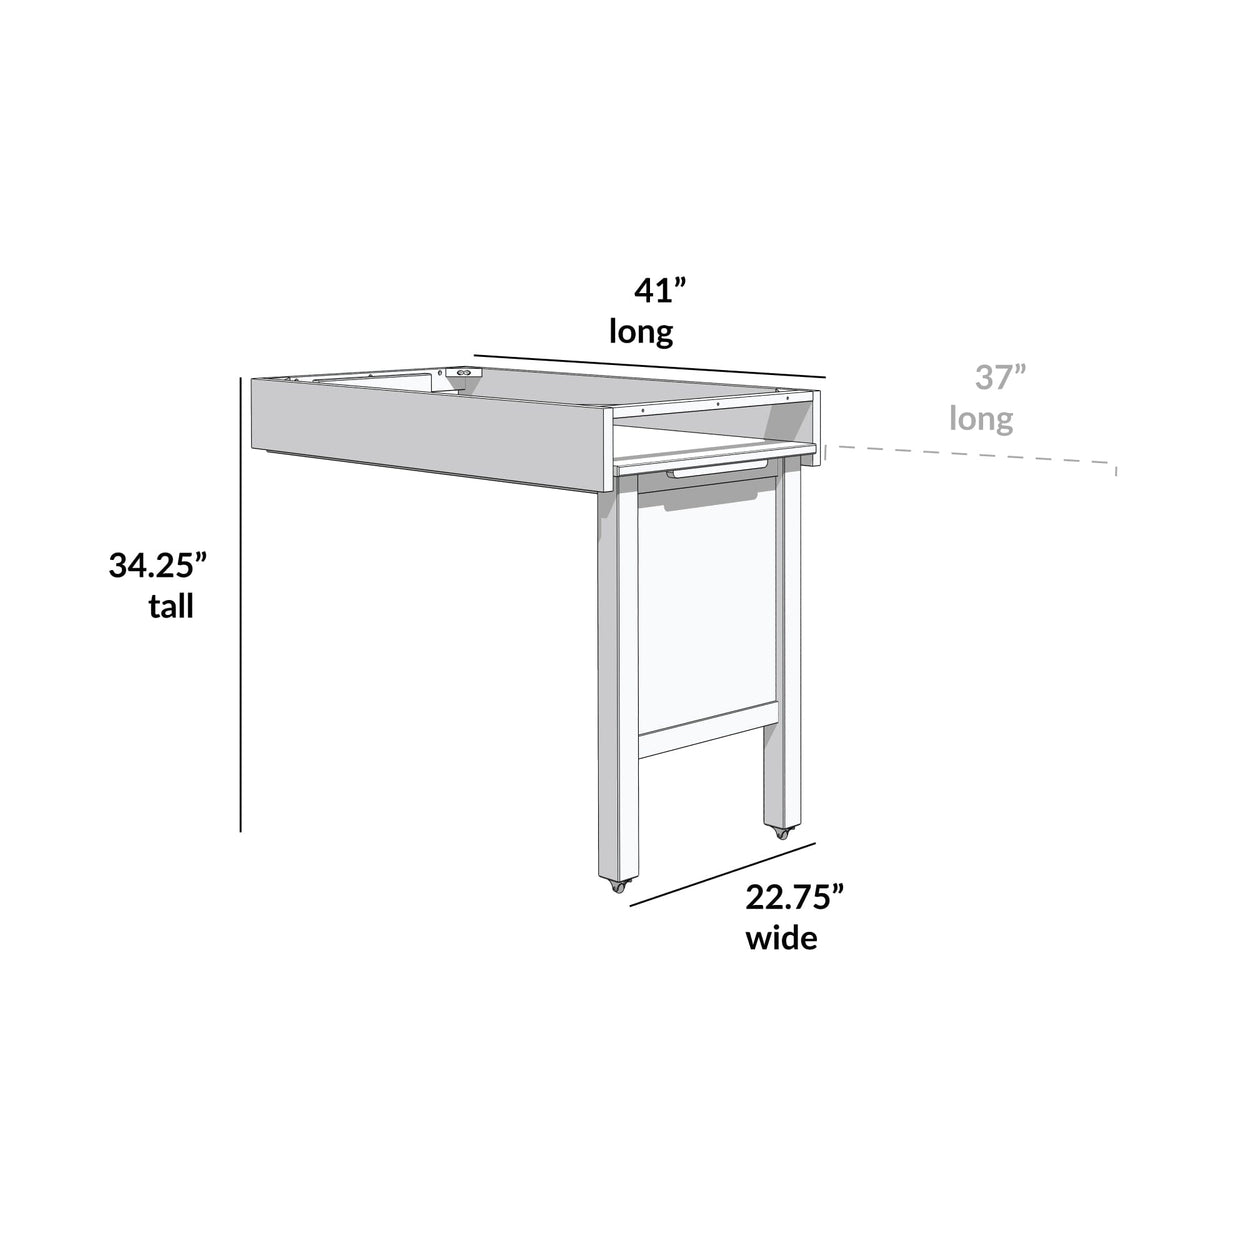 180240-002 : Furniture Pull-out Desk, White